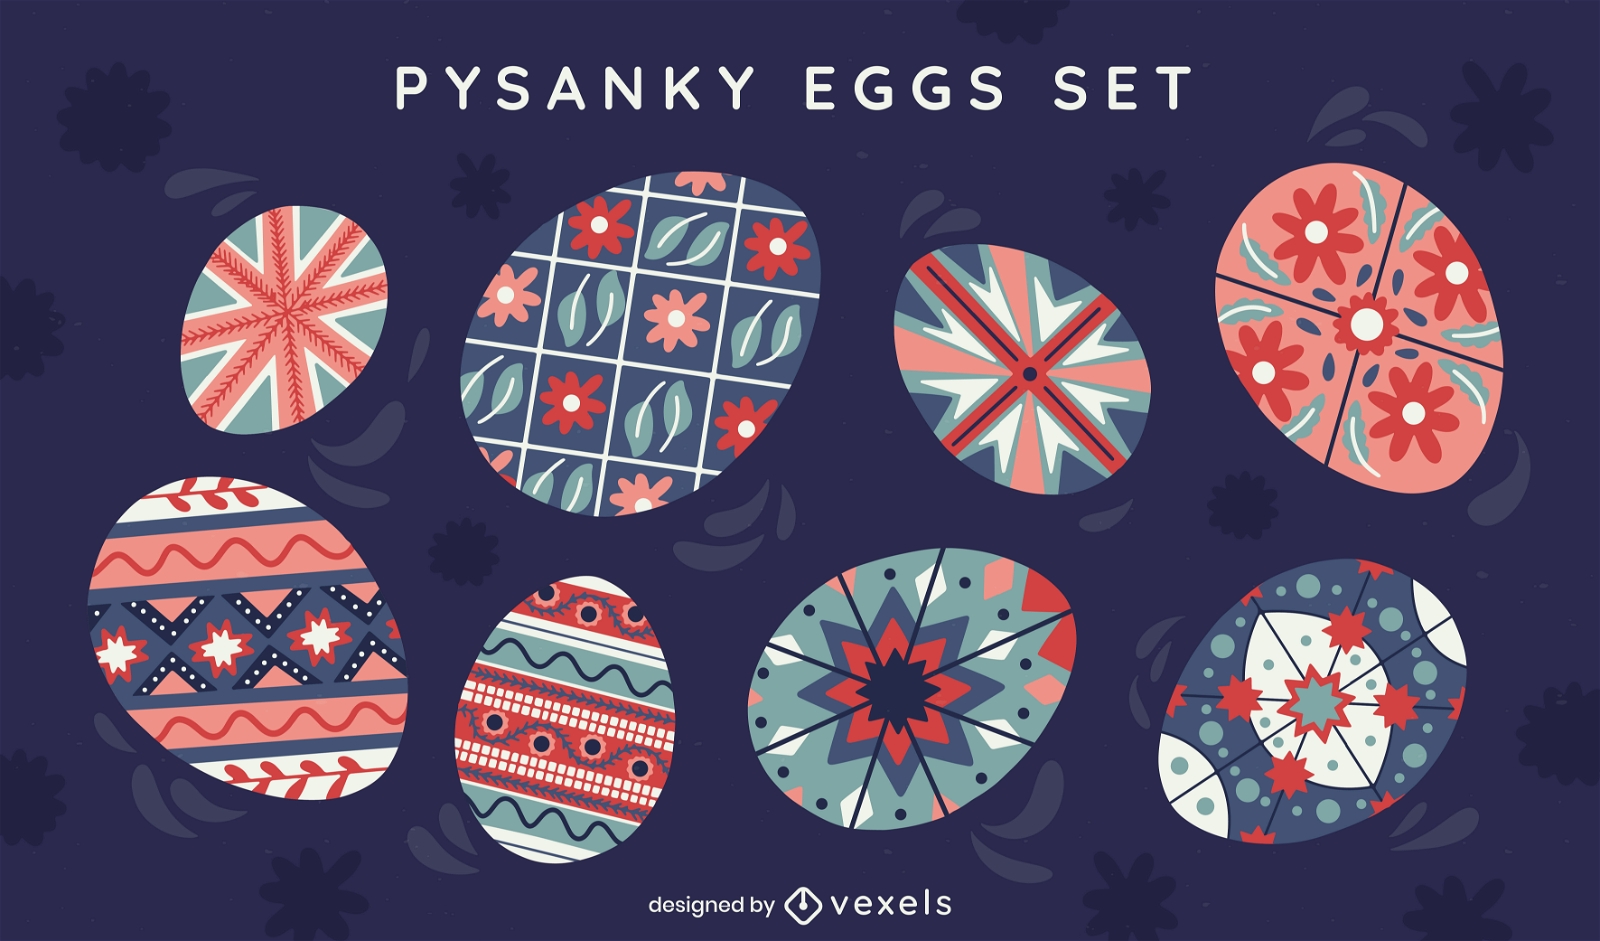 Floral and geometric easter eggs holiday set